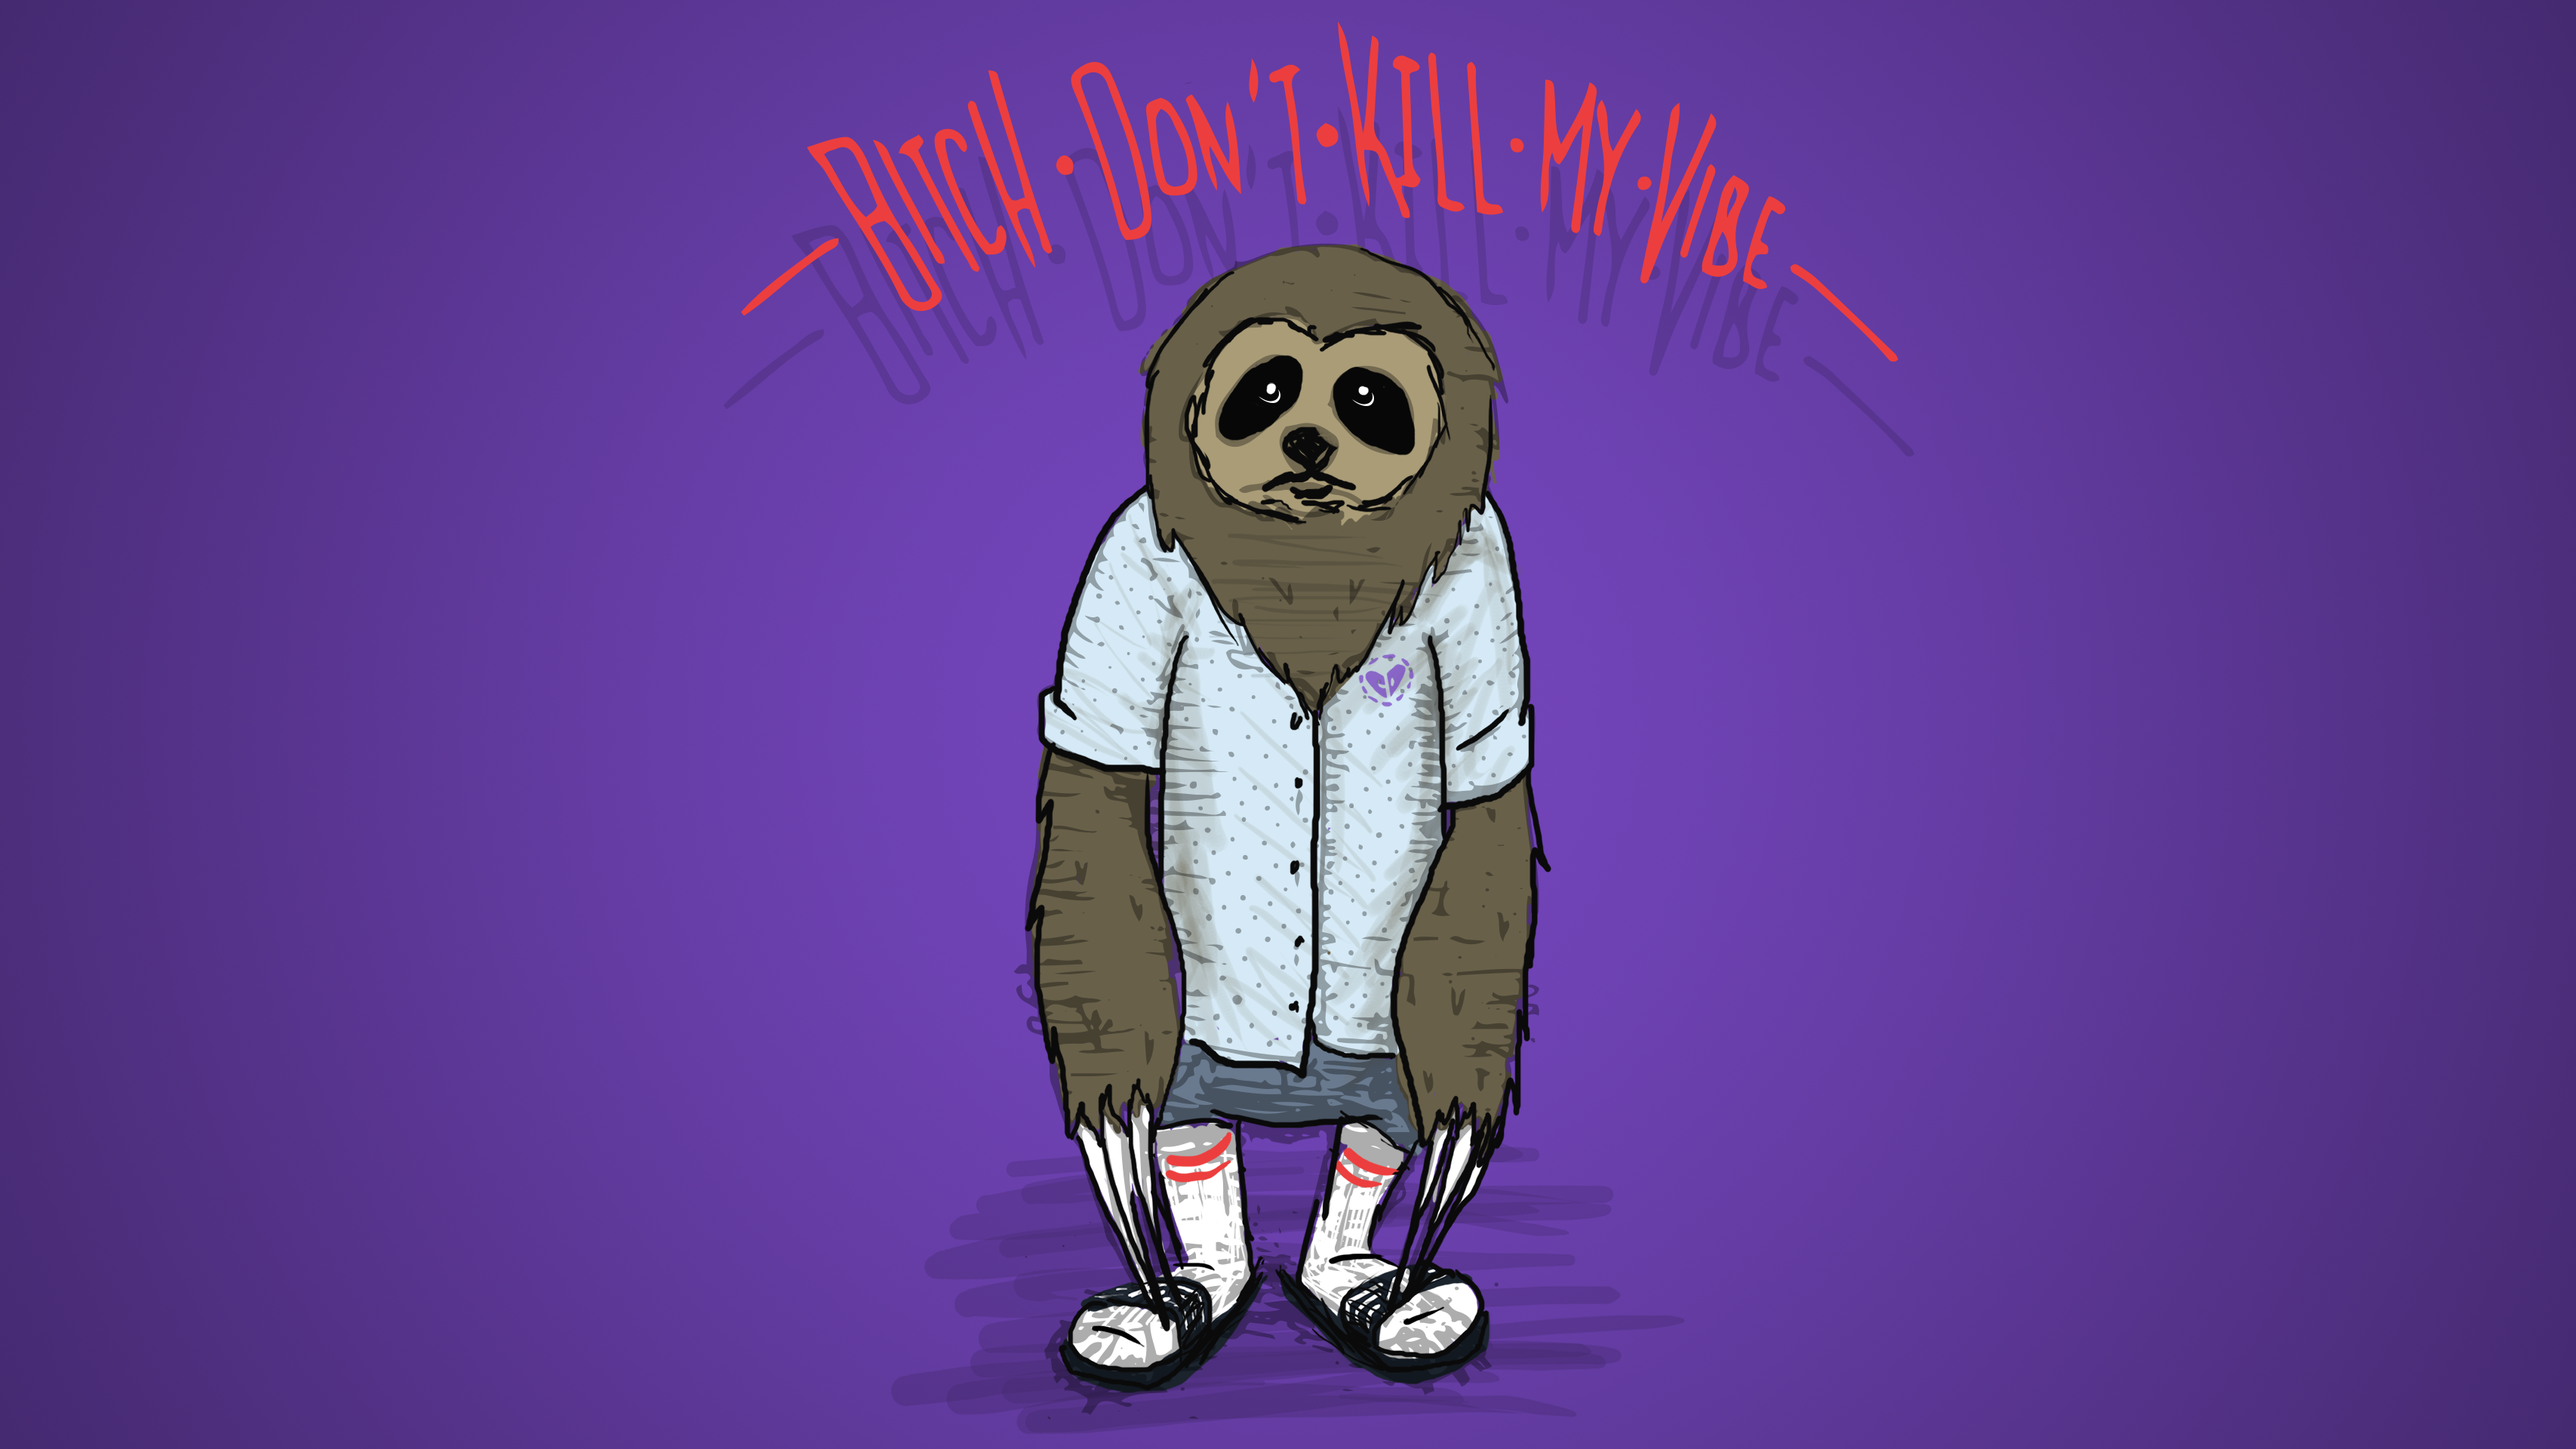 Stoner Sloth is about socks and sandals.